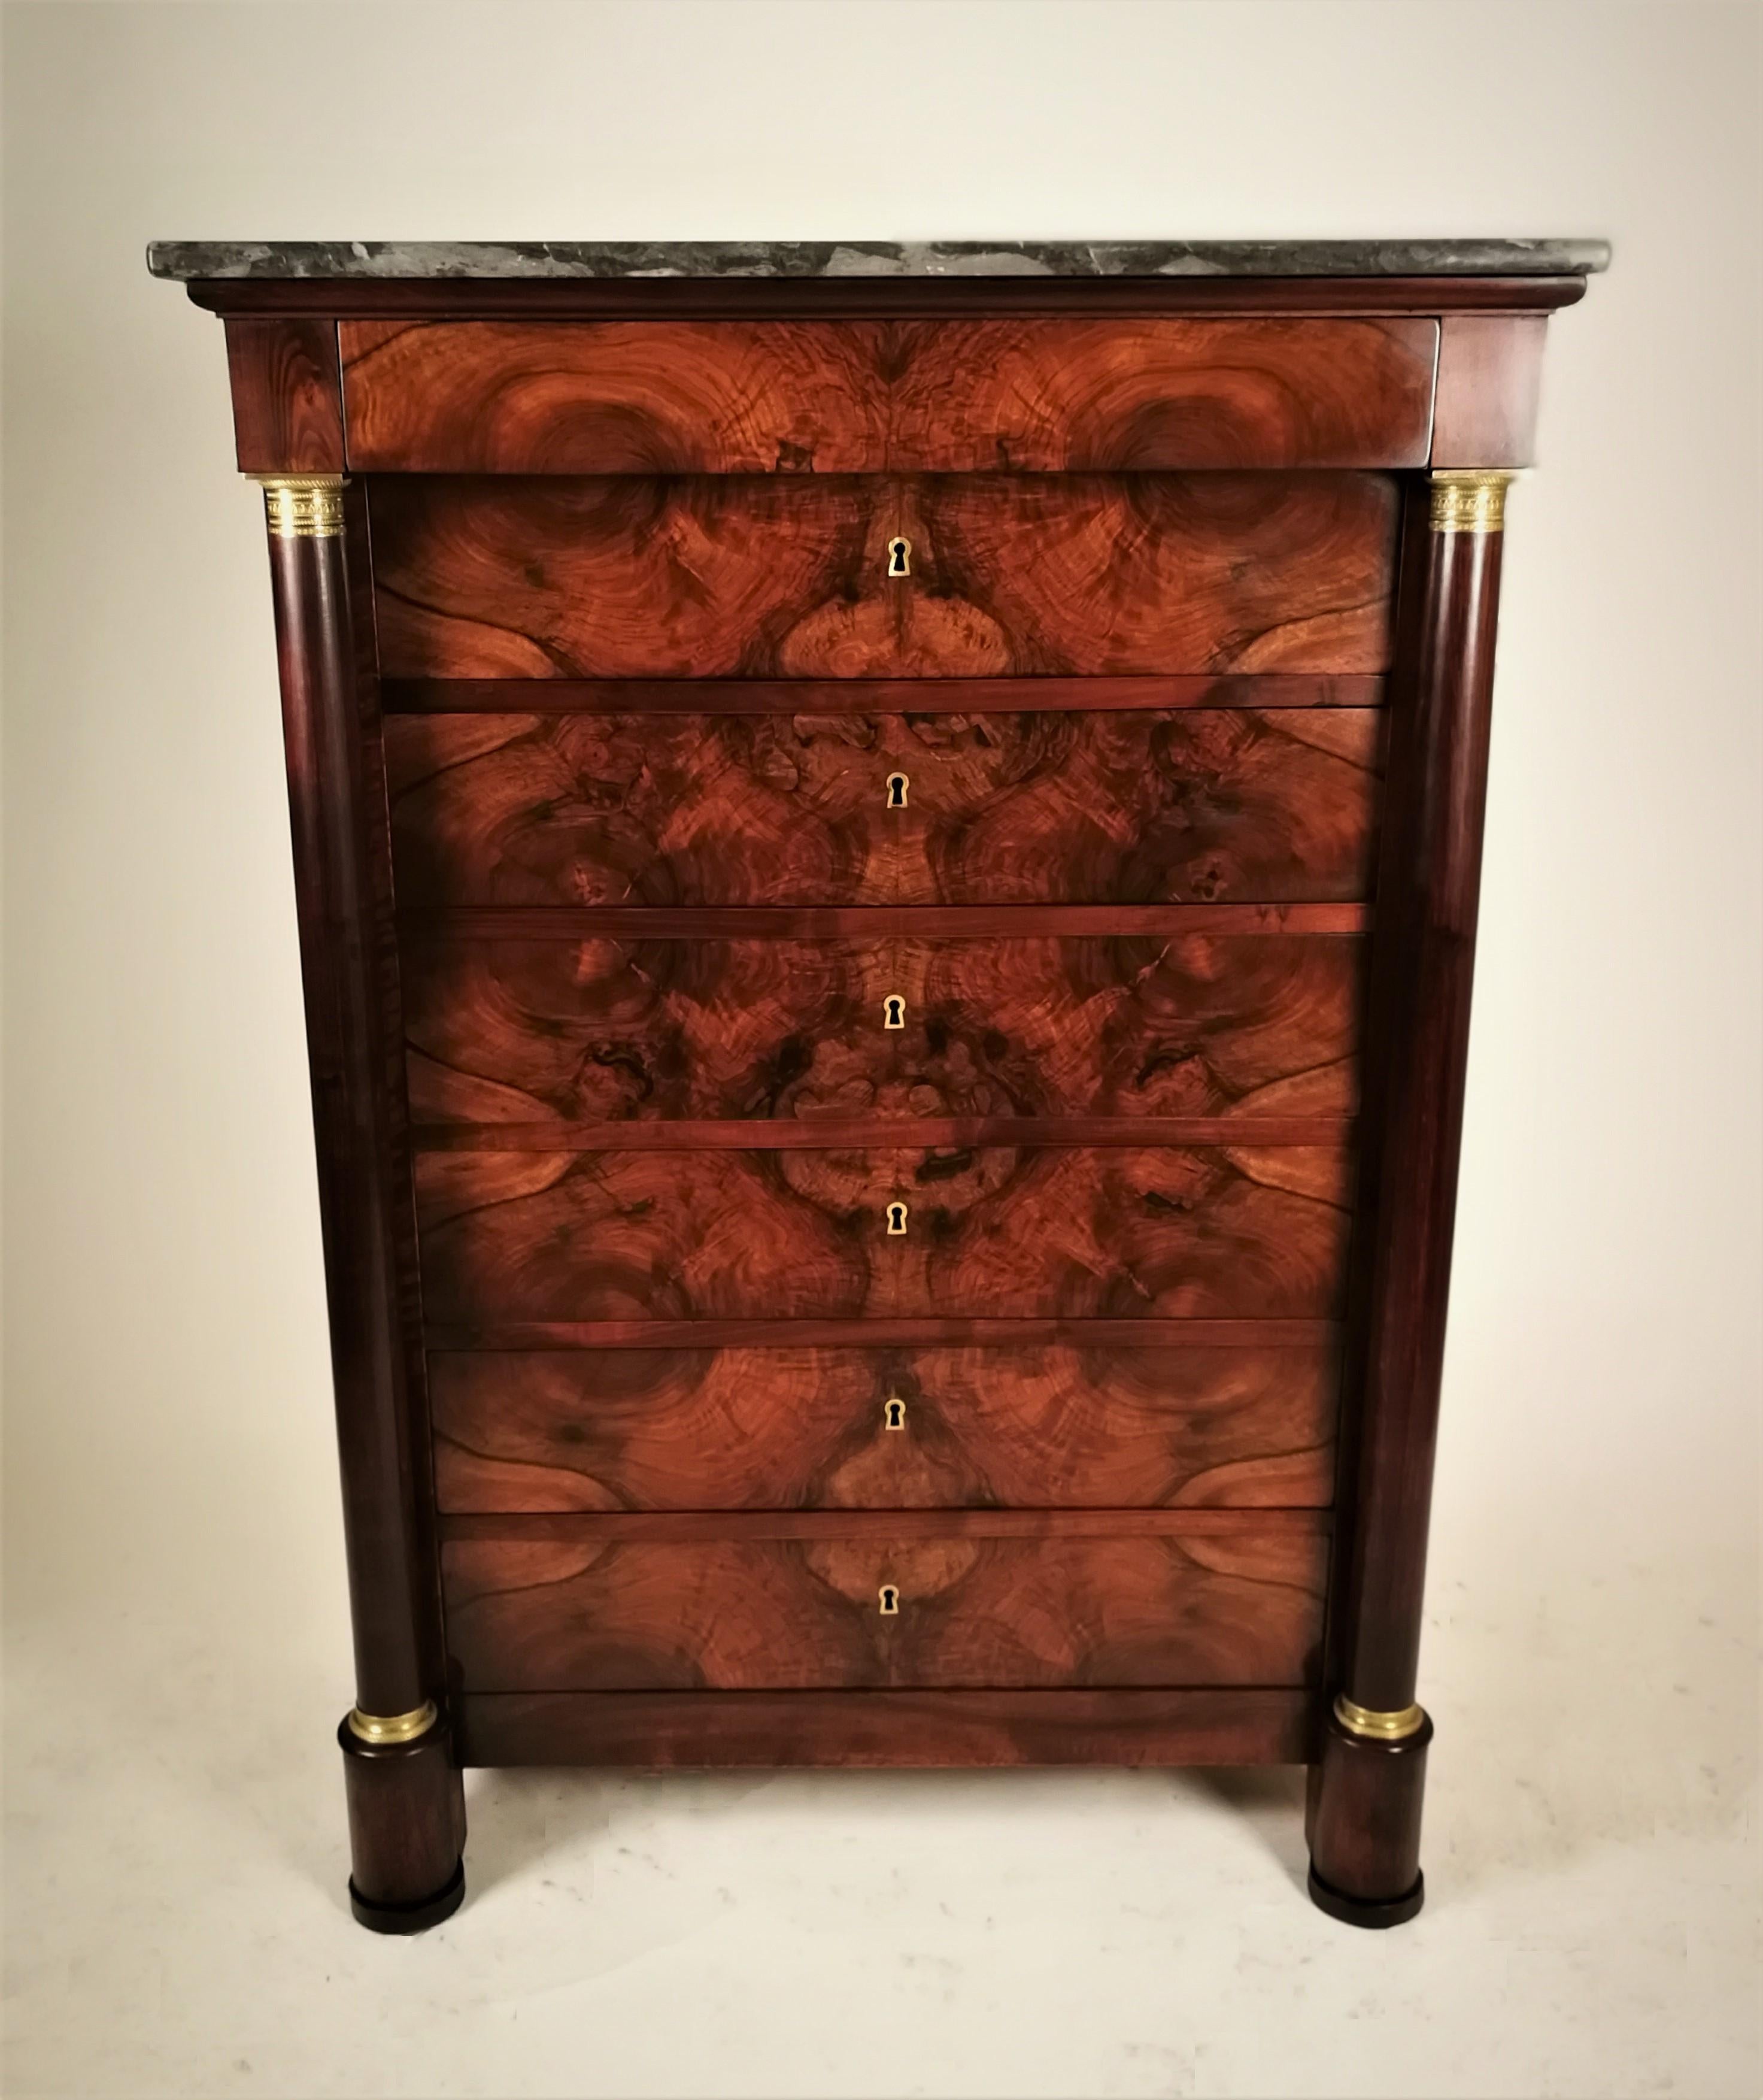 19th century, French walnut chest of drawers.
On the top, it has a veined gray marble. 
Cabinet with beautiful proportions with drawers in walnut briar. 
On the sides, there are two columns embellished with gilded bronze capitals. 
Restored and